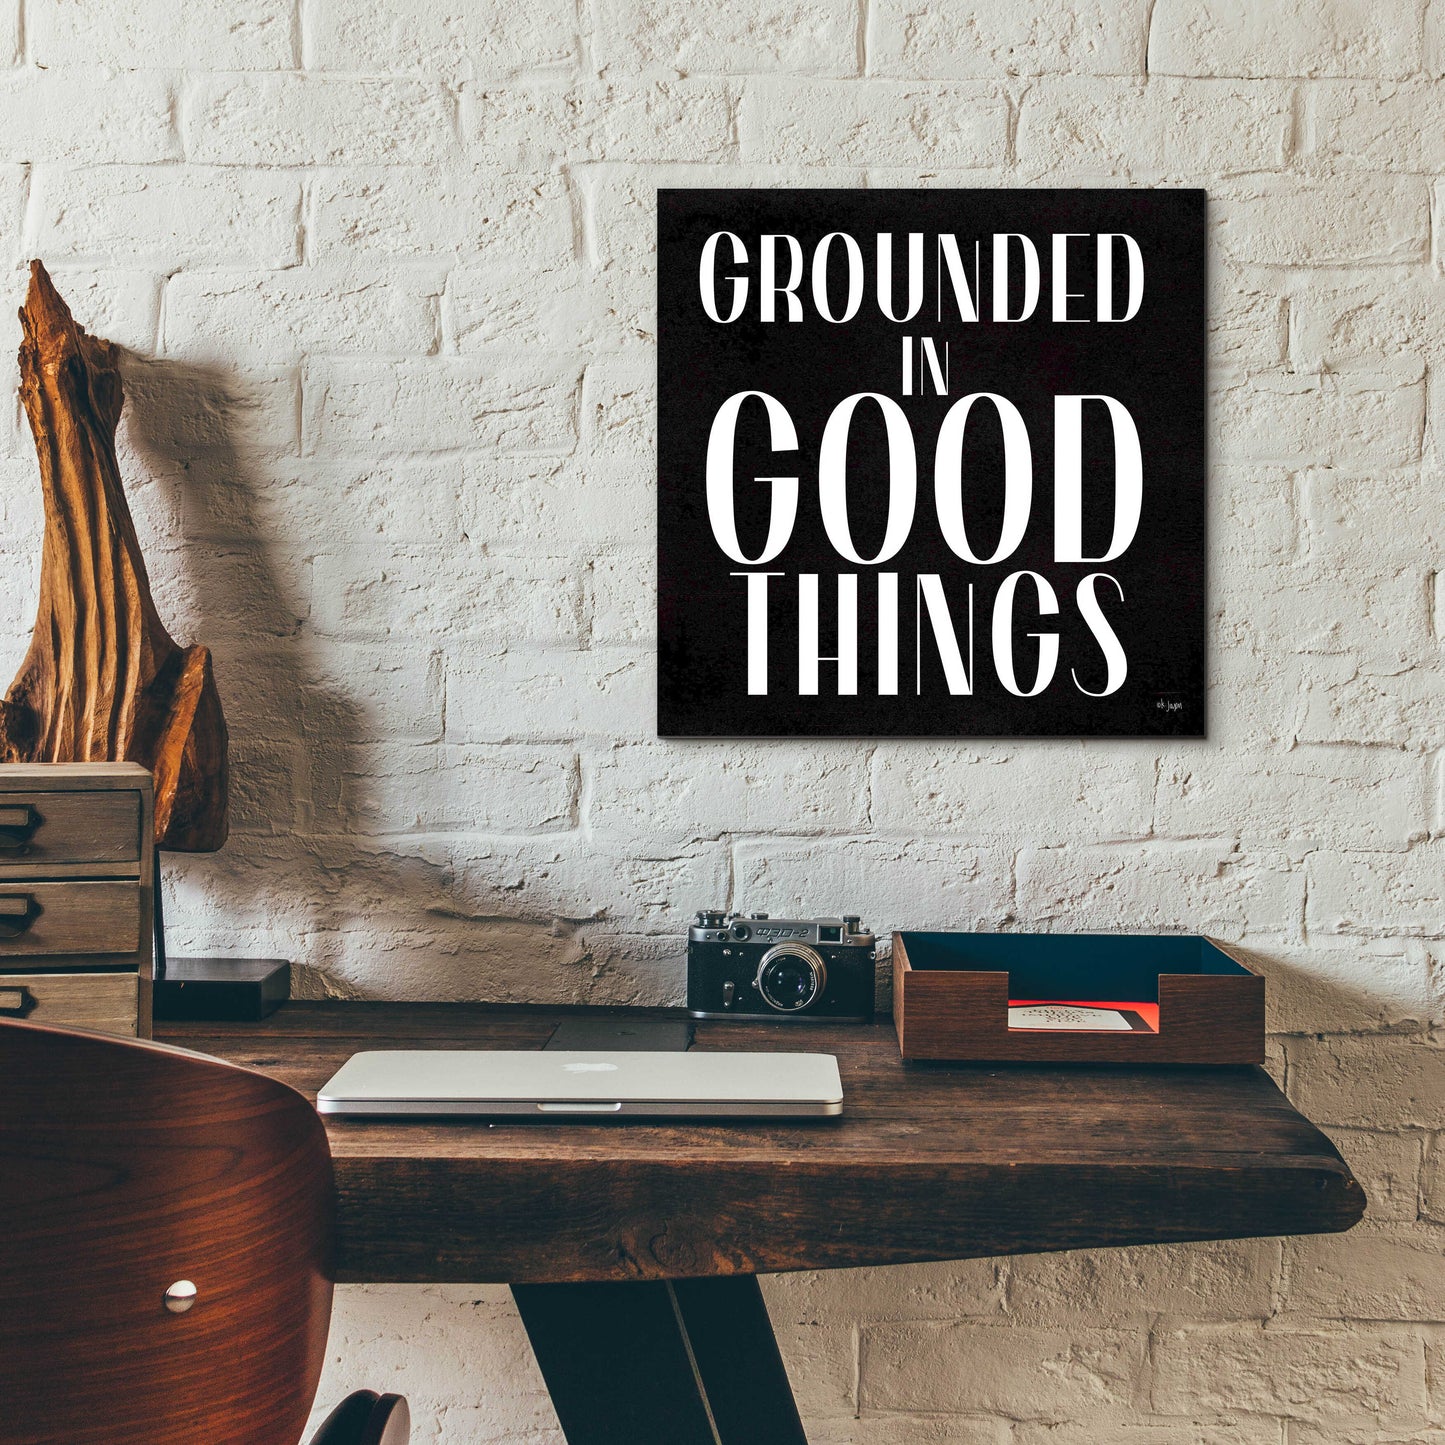 Epic Art 'Grounded in Good Things' by Jaxn Blvd., Acrylic Glass Wall Art,12x12